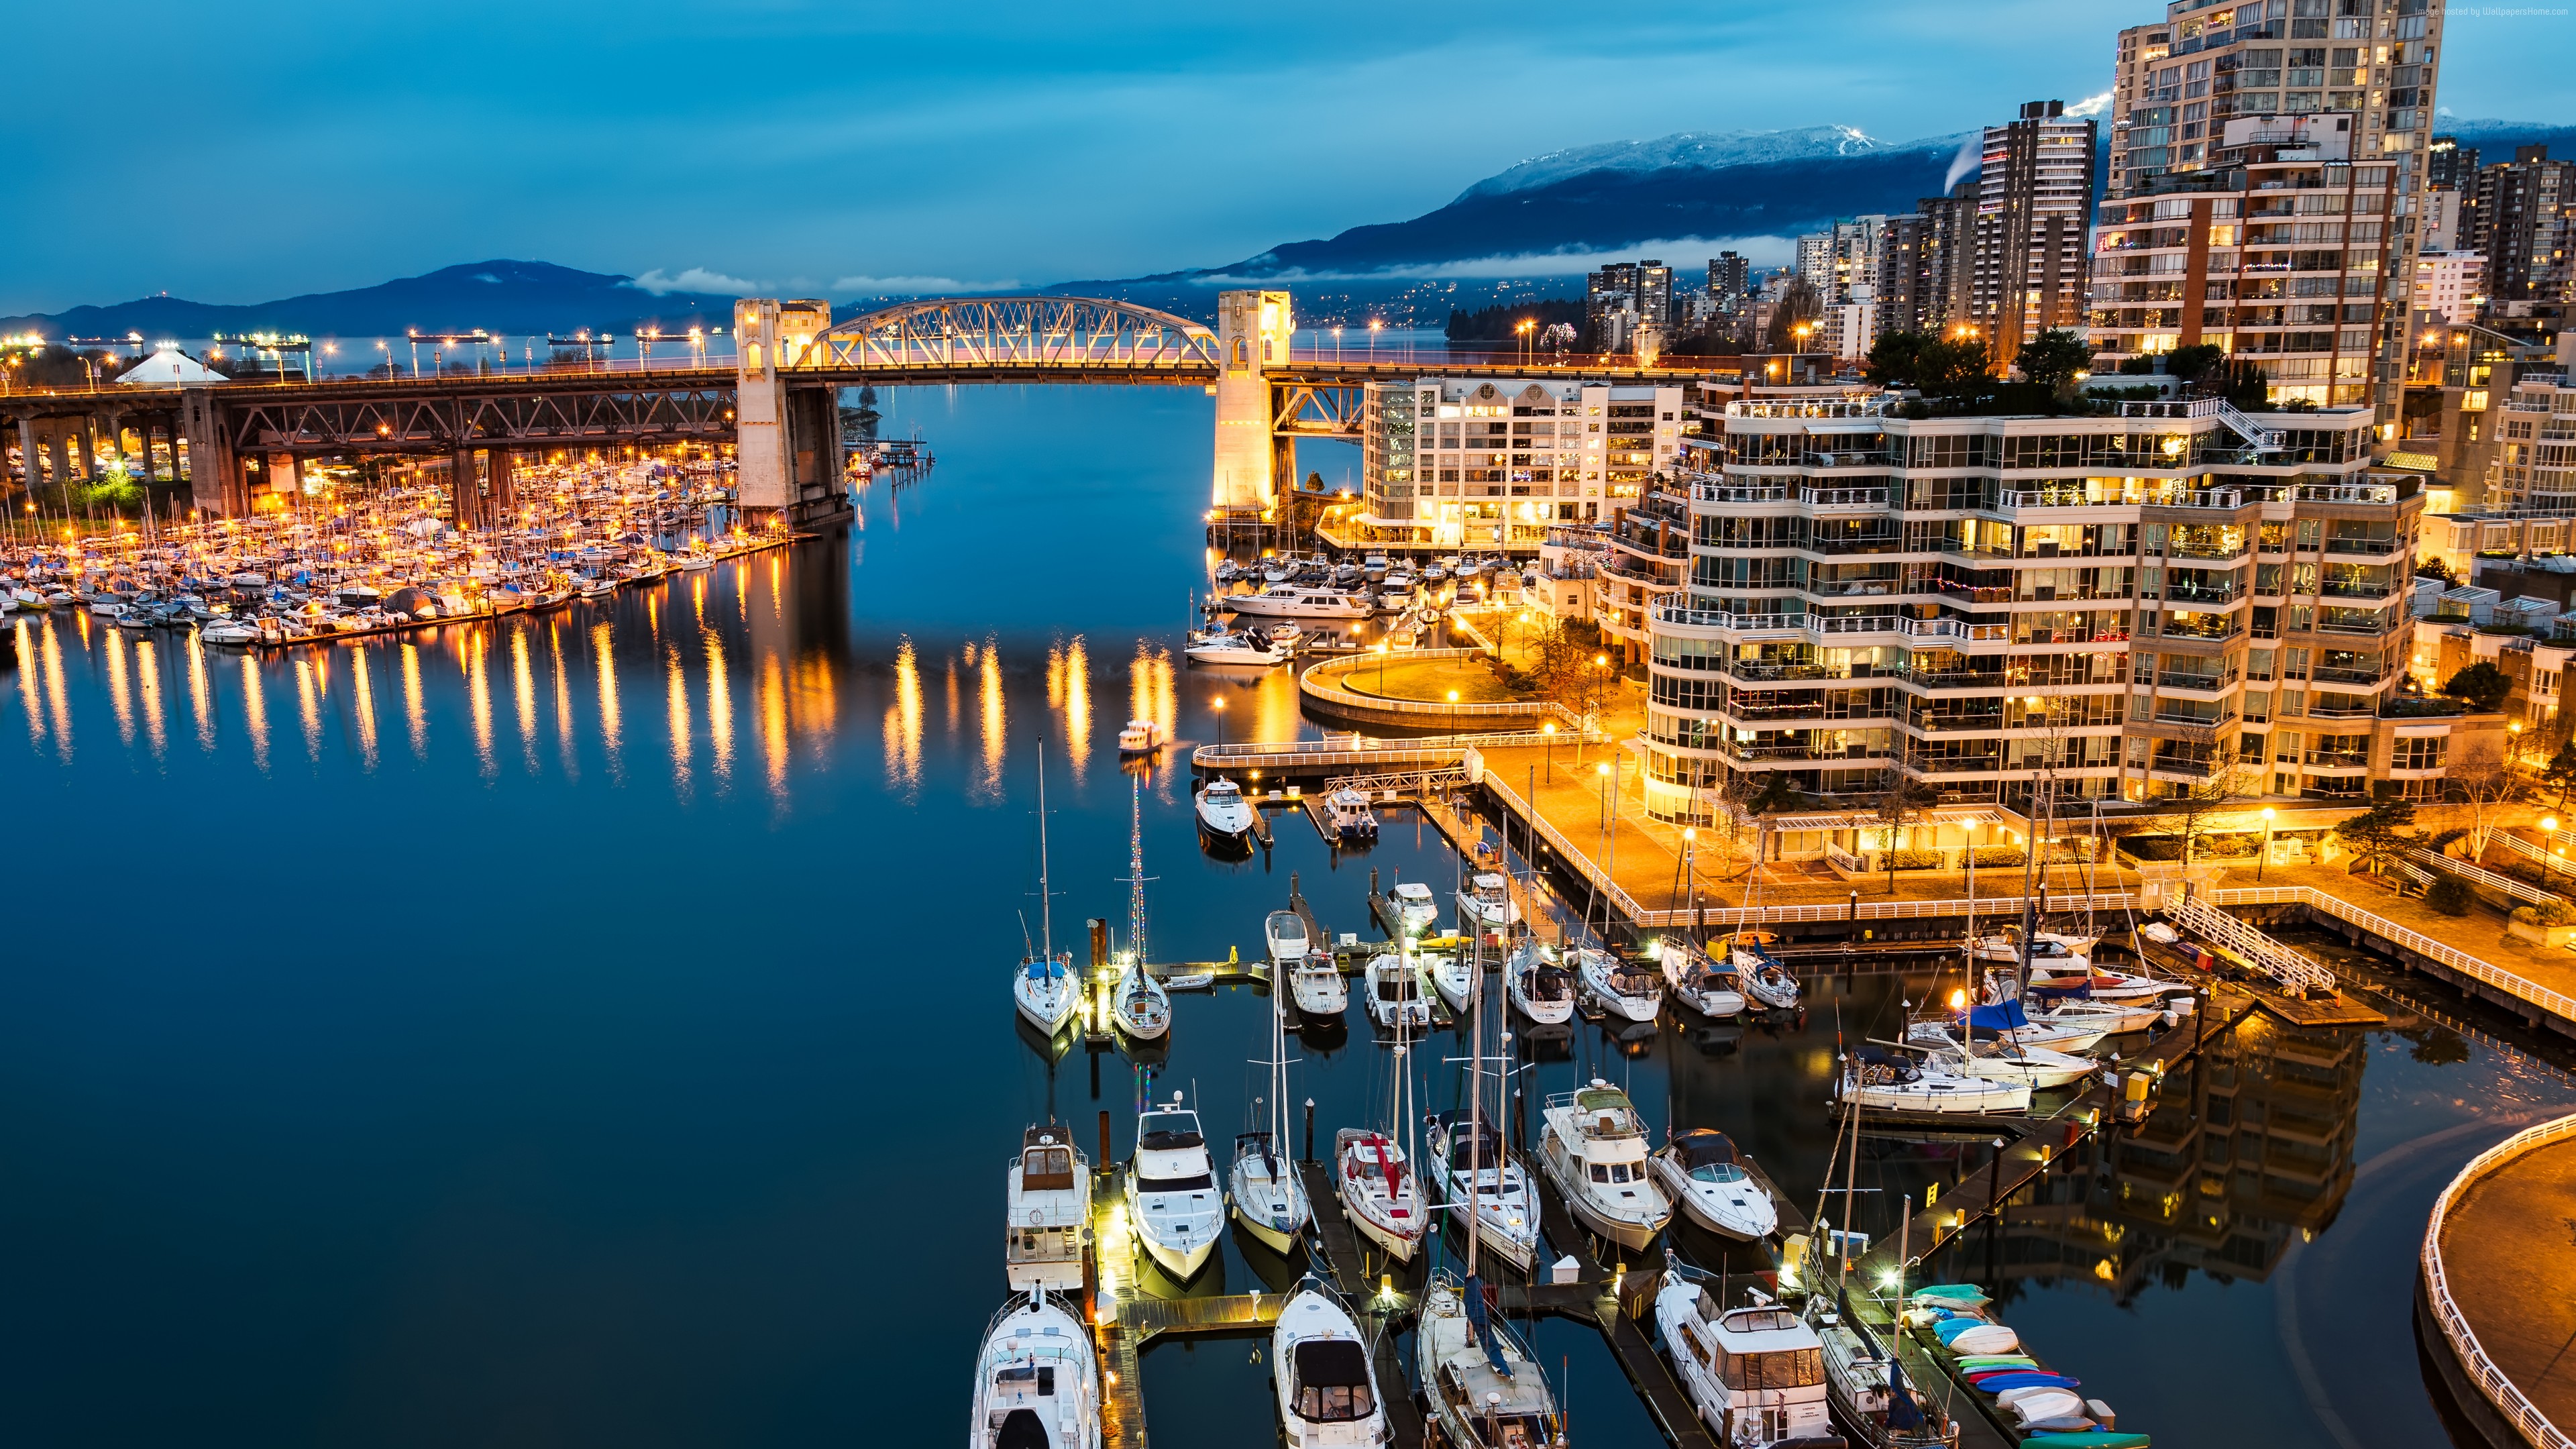 Wallpaper Vancouver, Granville, Island, Canada, night, Morning, lights, boats, blue, water, sea, travel, Travel